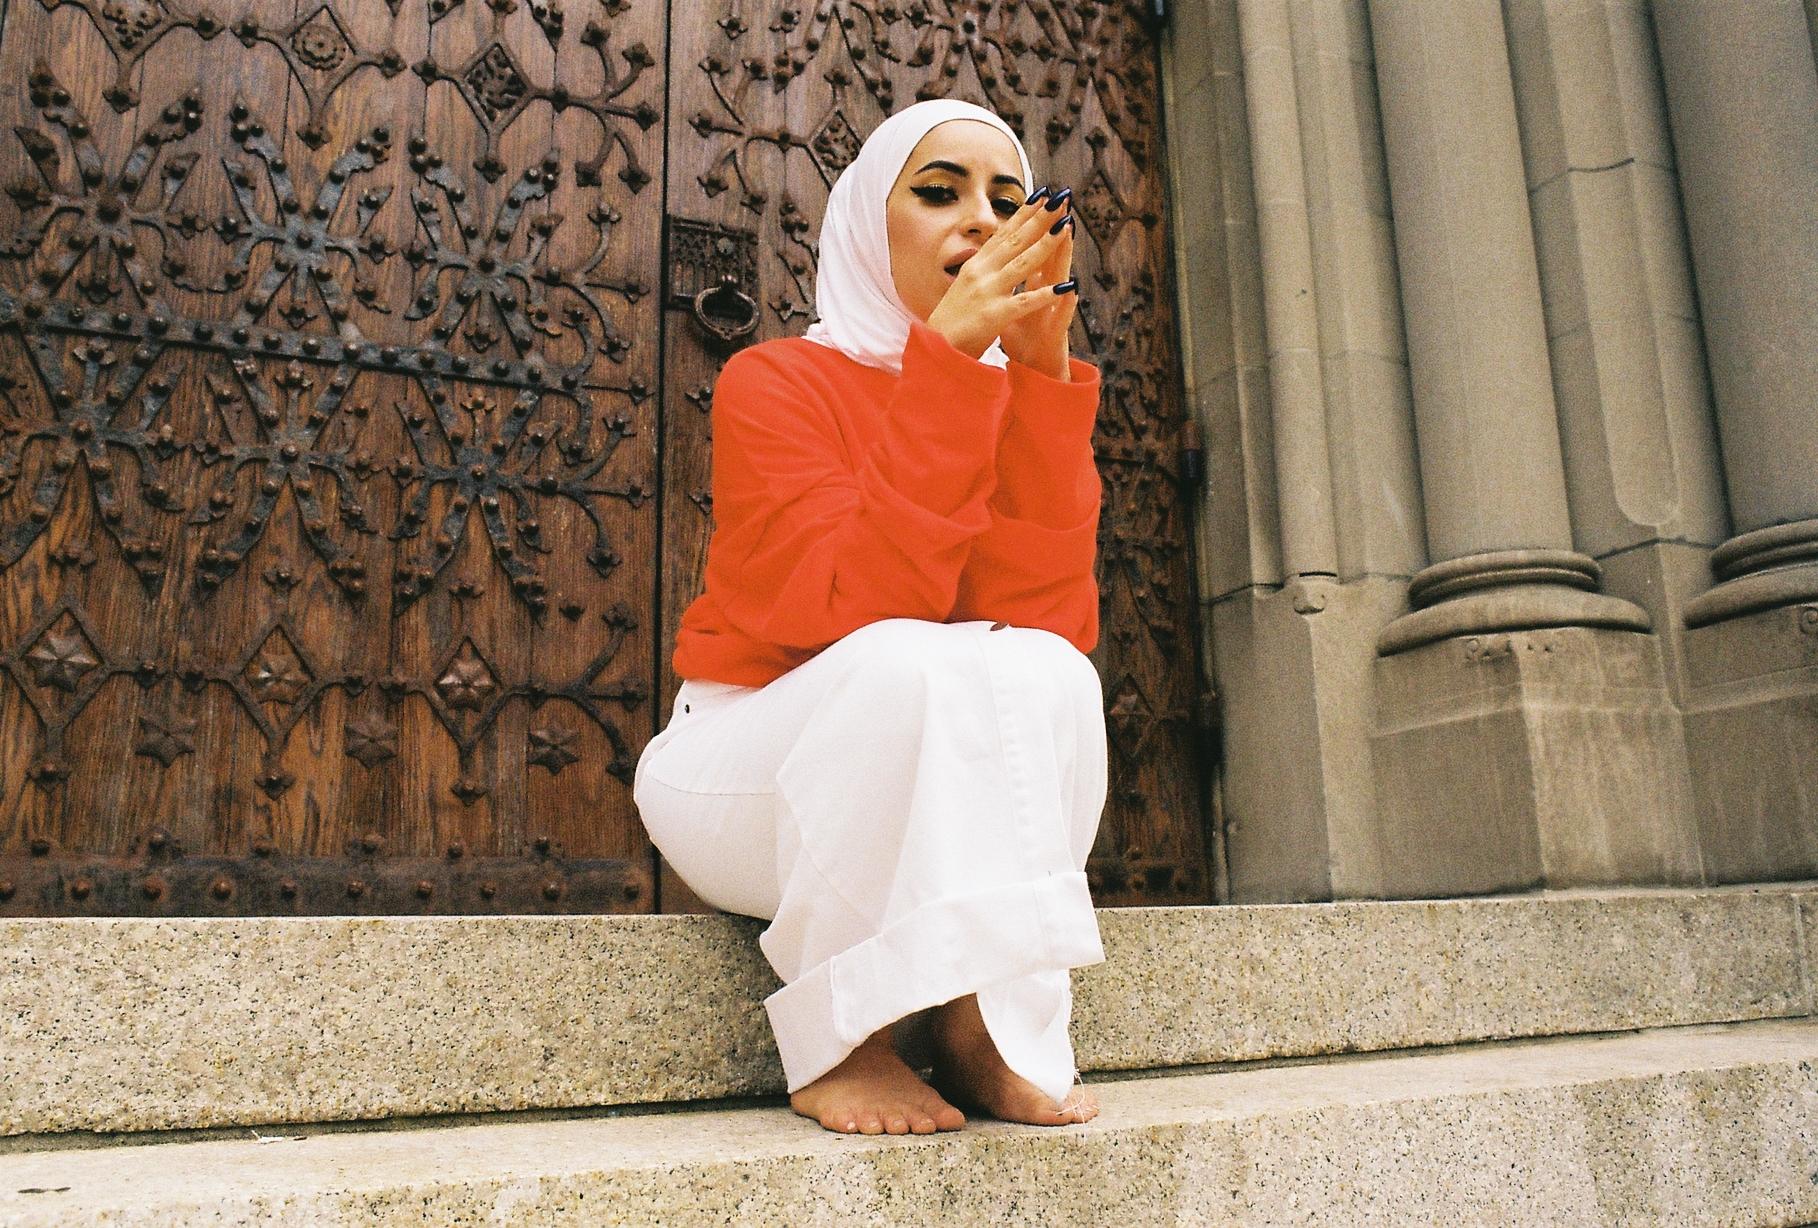 American-Syrian rapper Mona Haydar on becoming a global role model for young Arab girls